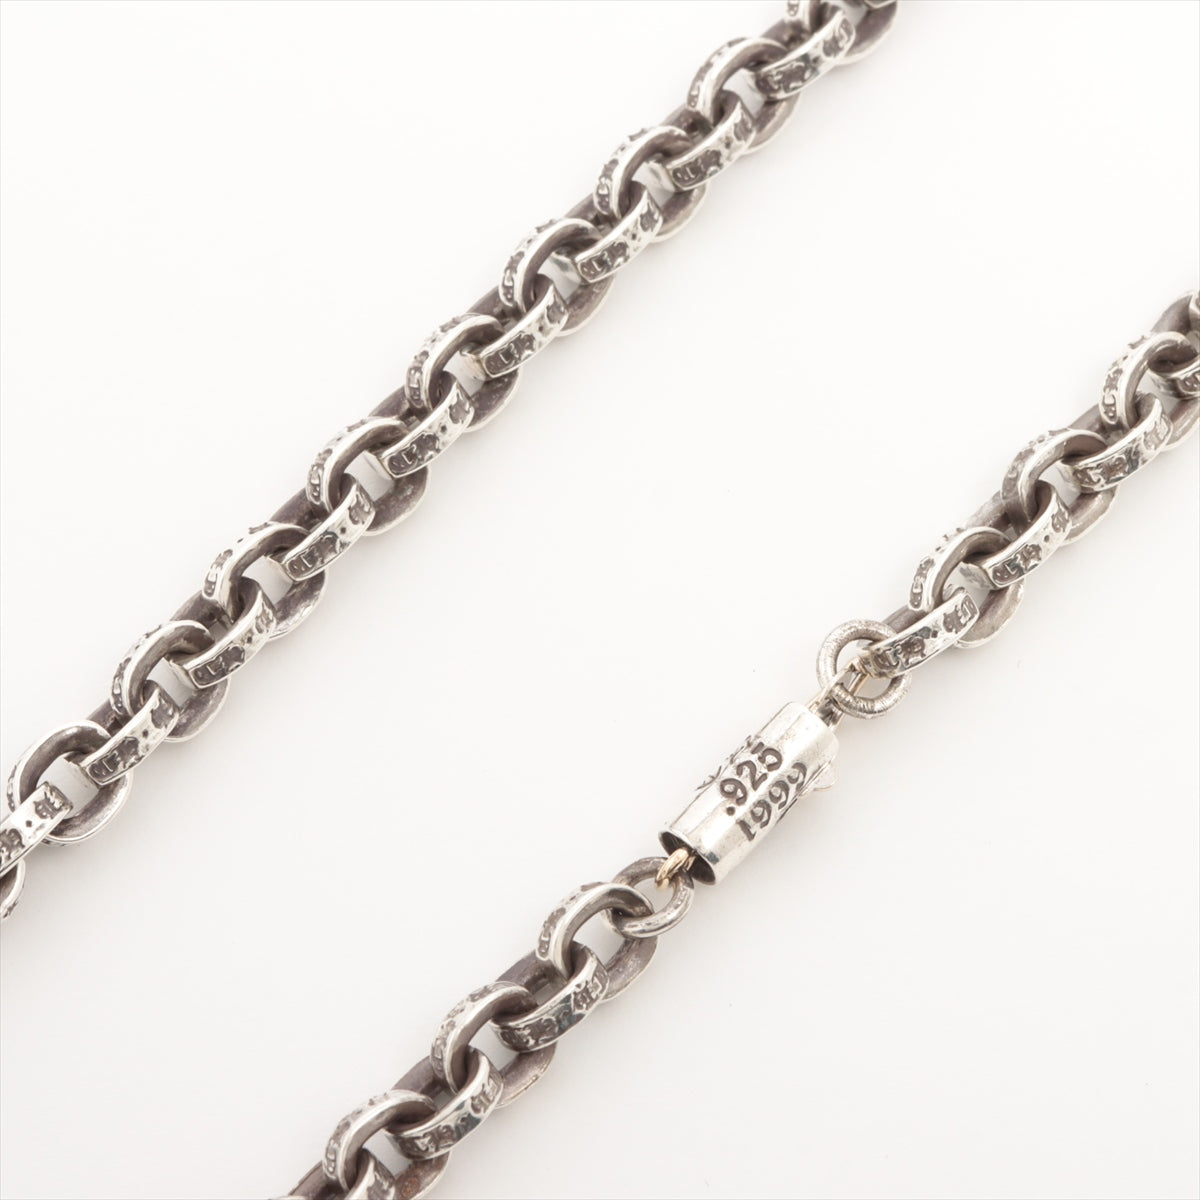 Chrome Hearts Paper Chain 18 inches Necklace 925×14K 34.4g With invoice